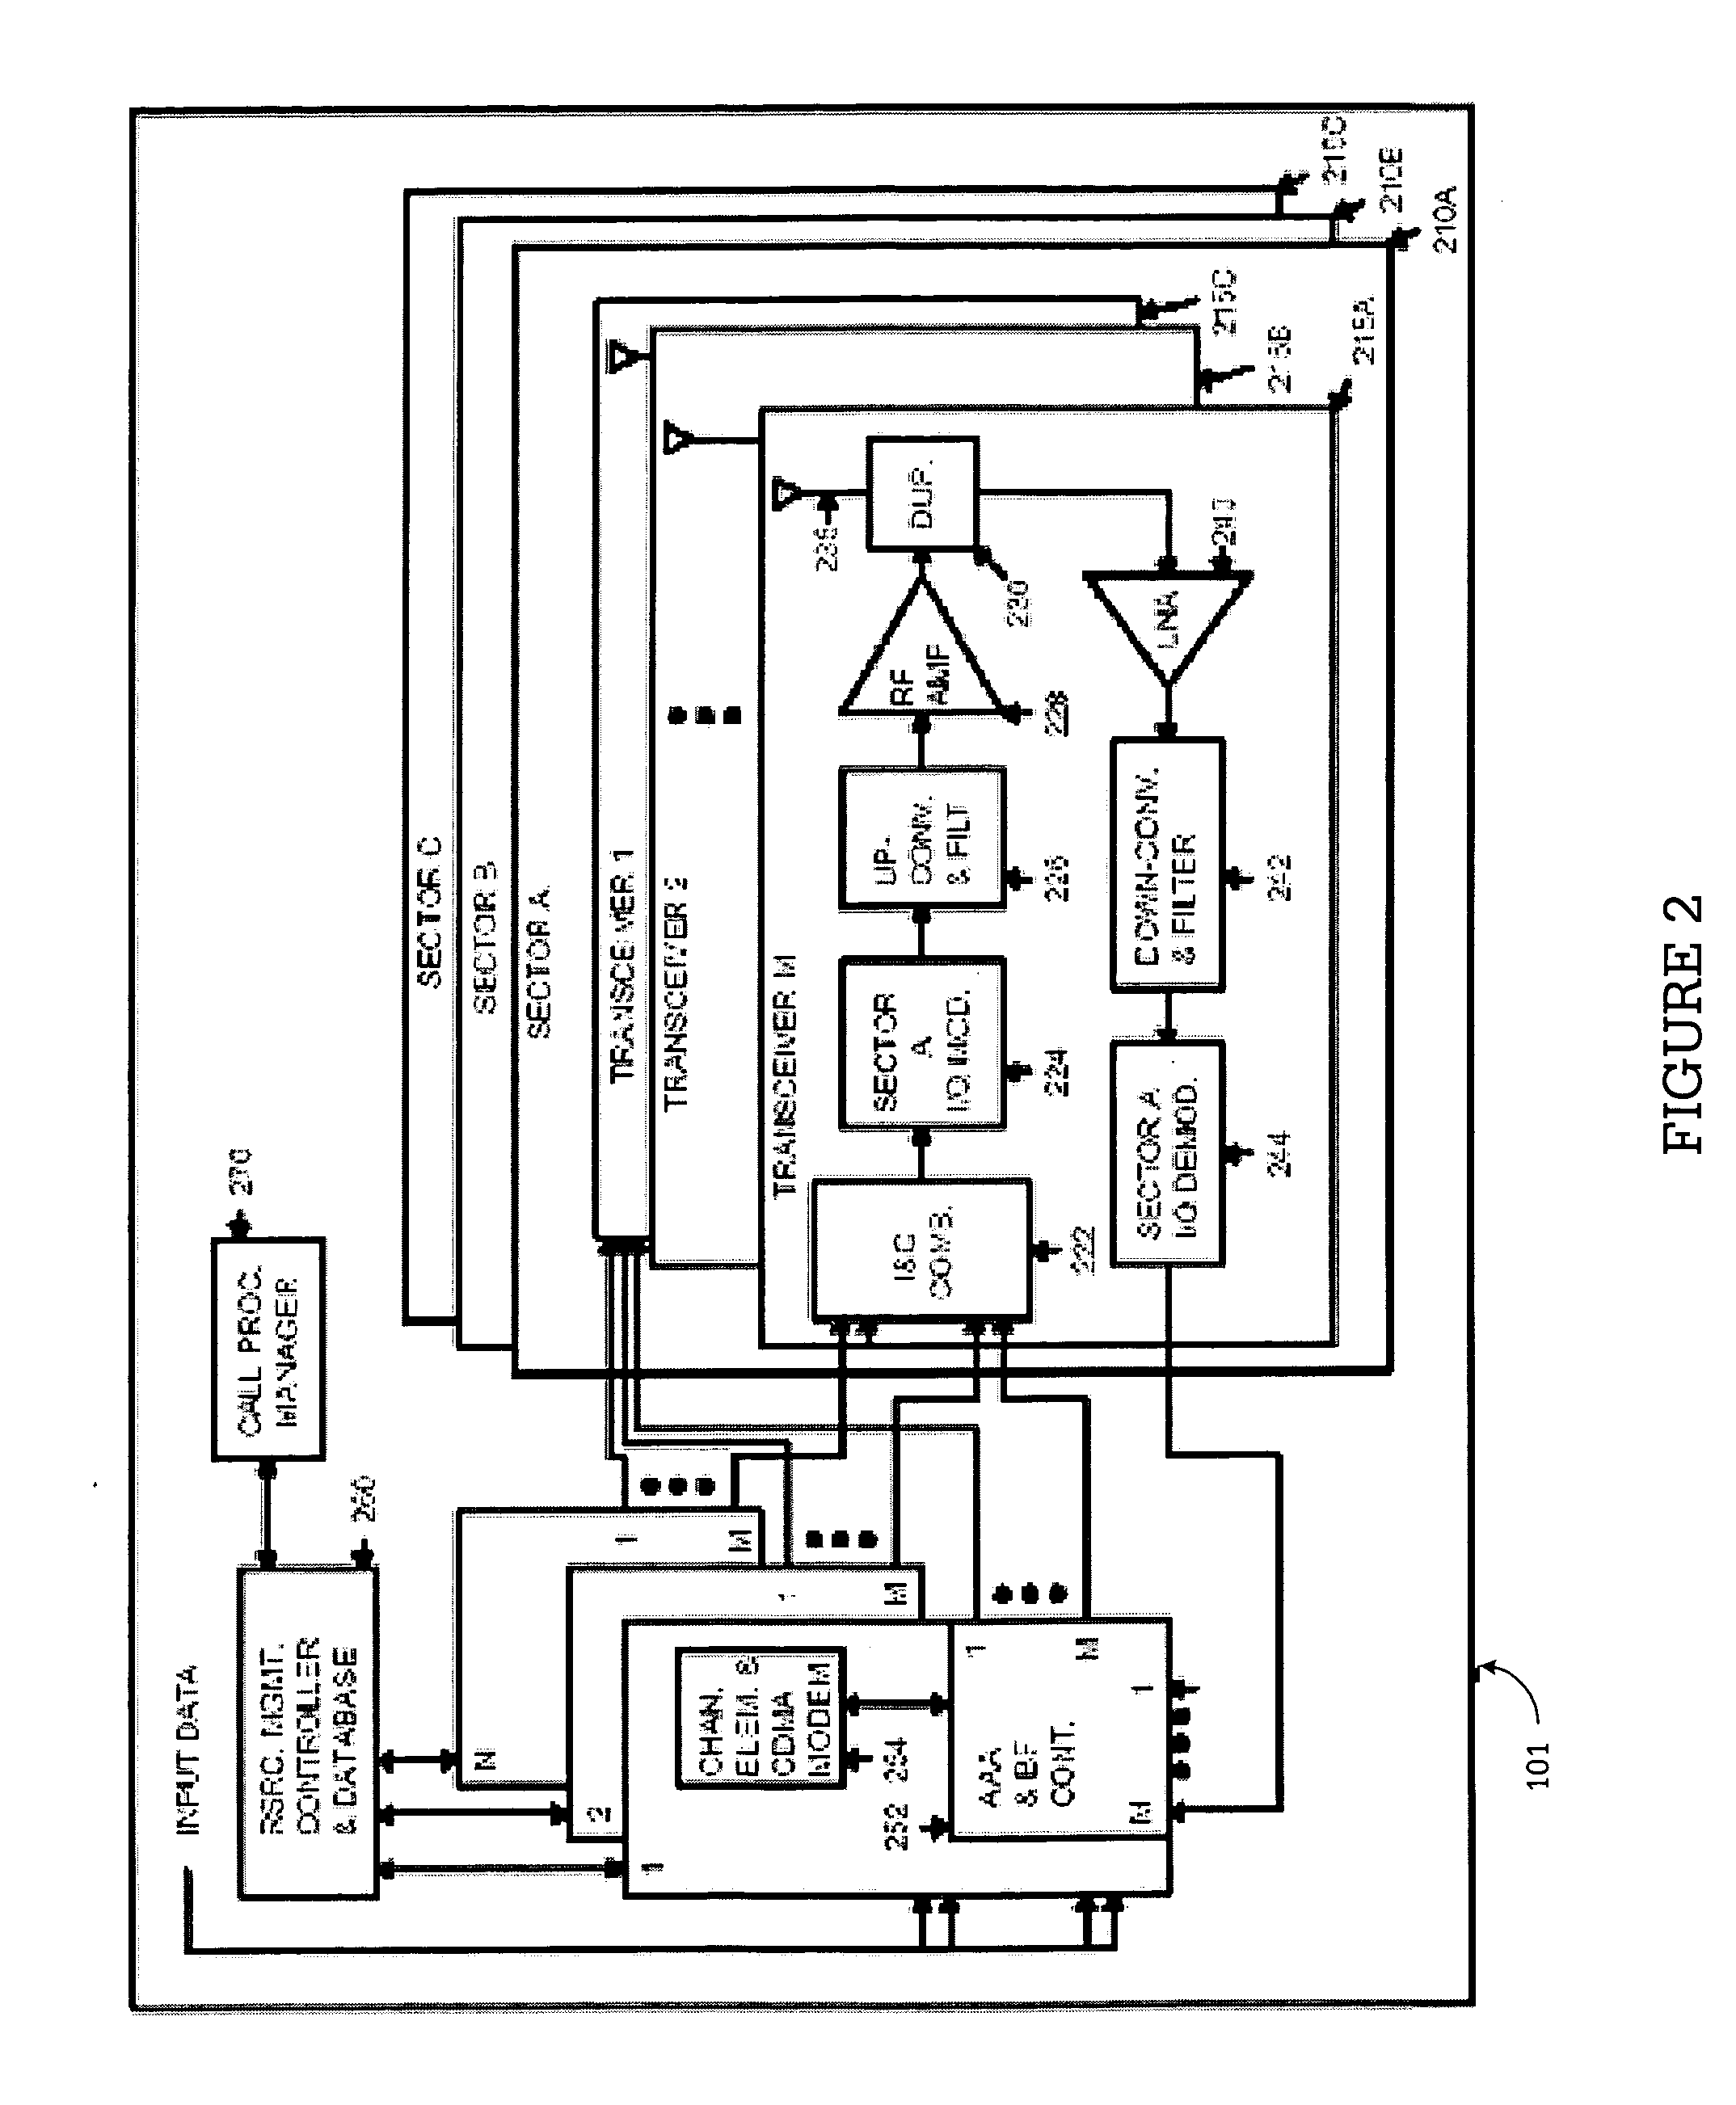 Apparatus and method for allocating walsh codes to mobile stations in an adaptive antenna array wireless network